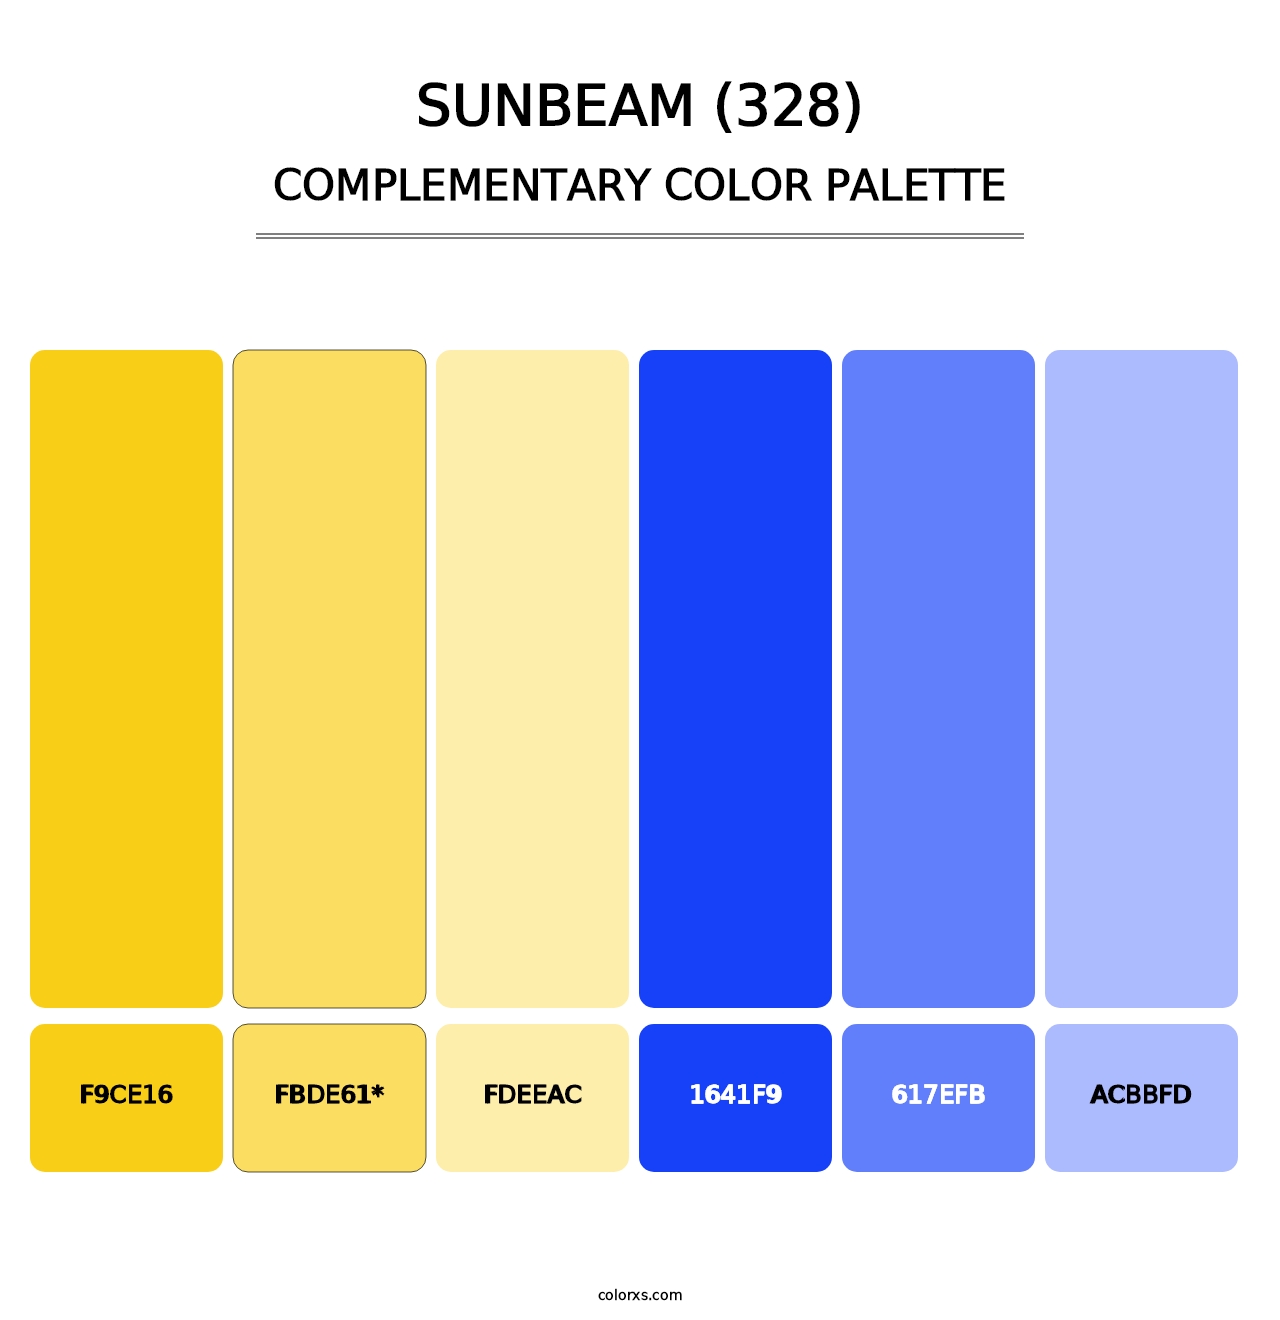 Sunbeam (328) - Complementary Color Palette